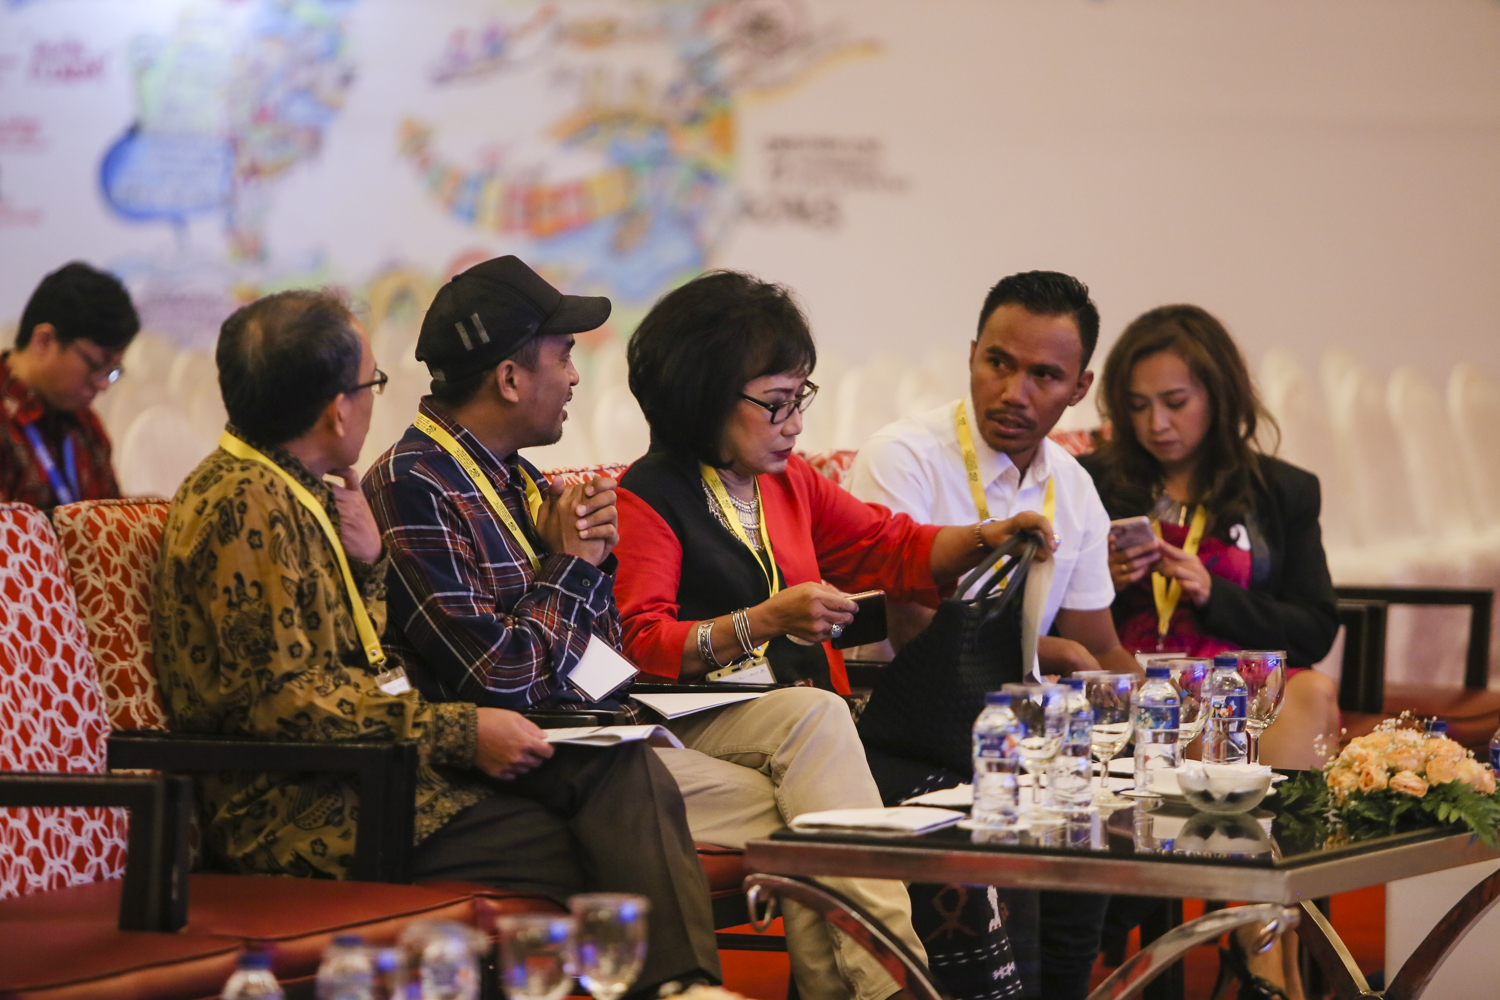 Special Session I: Reducing Disparity by Optimisisng The Role of Culure in Eastern Indonesia